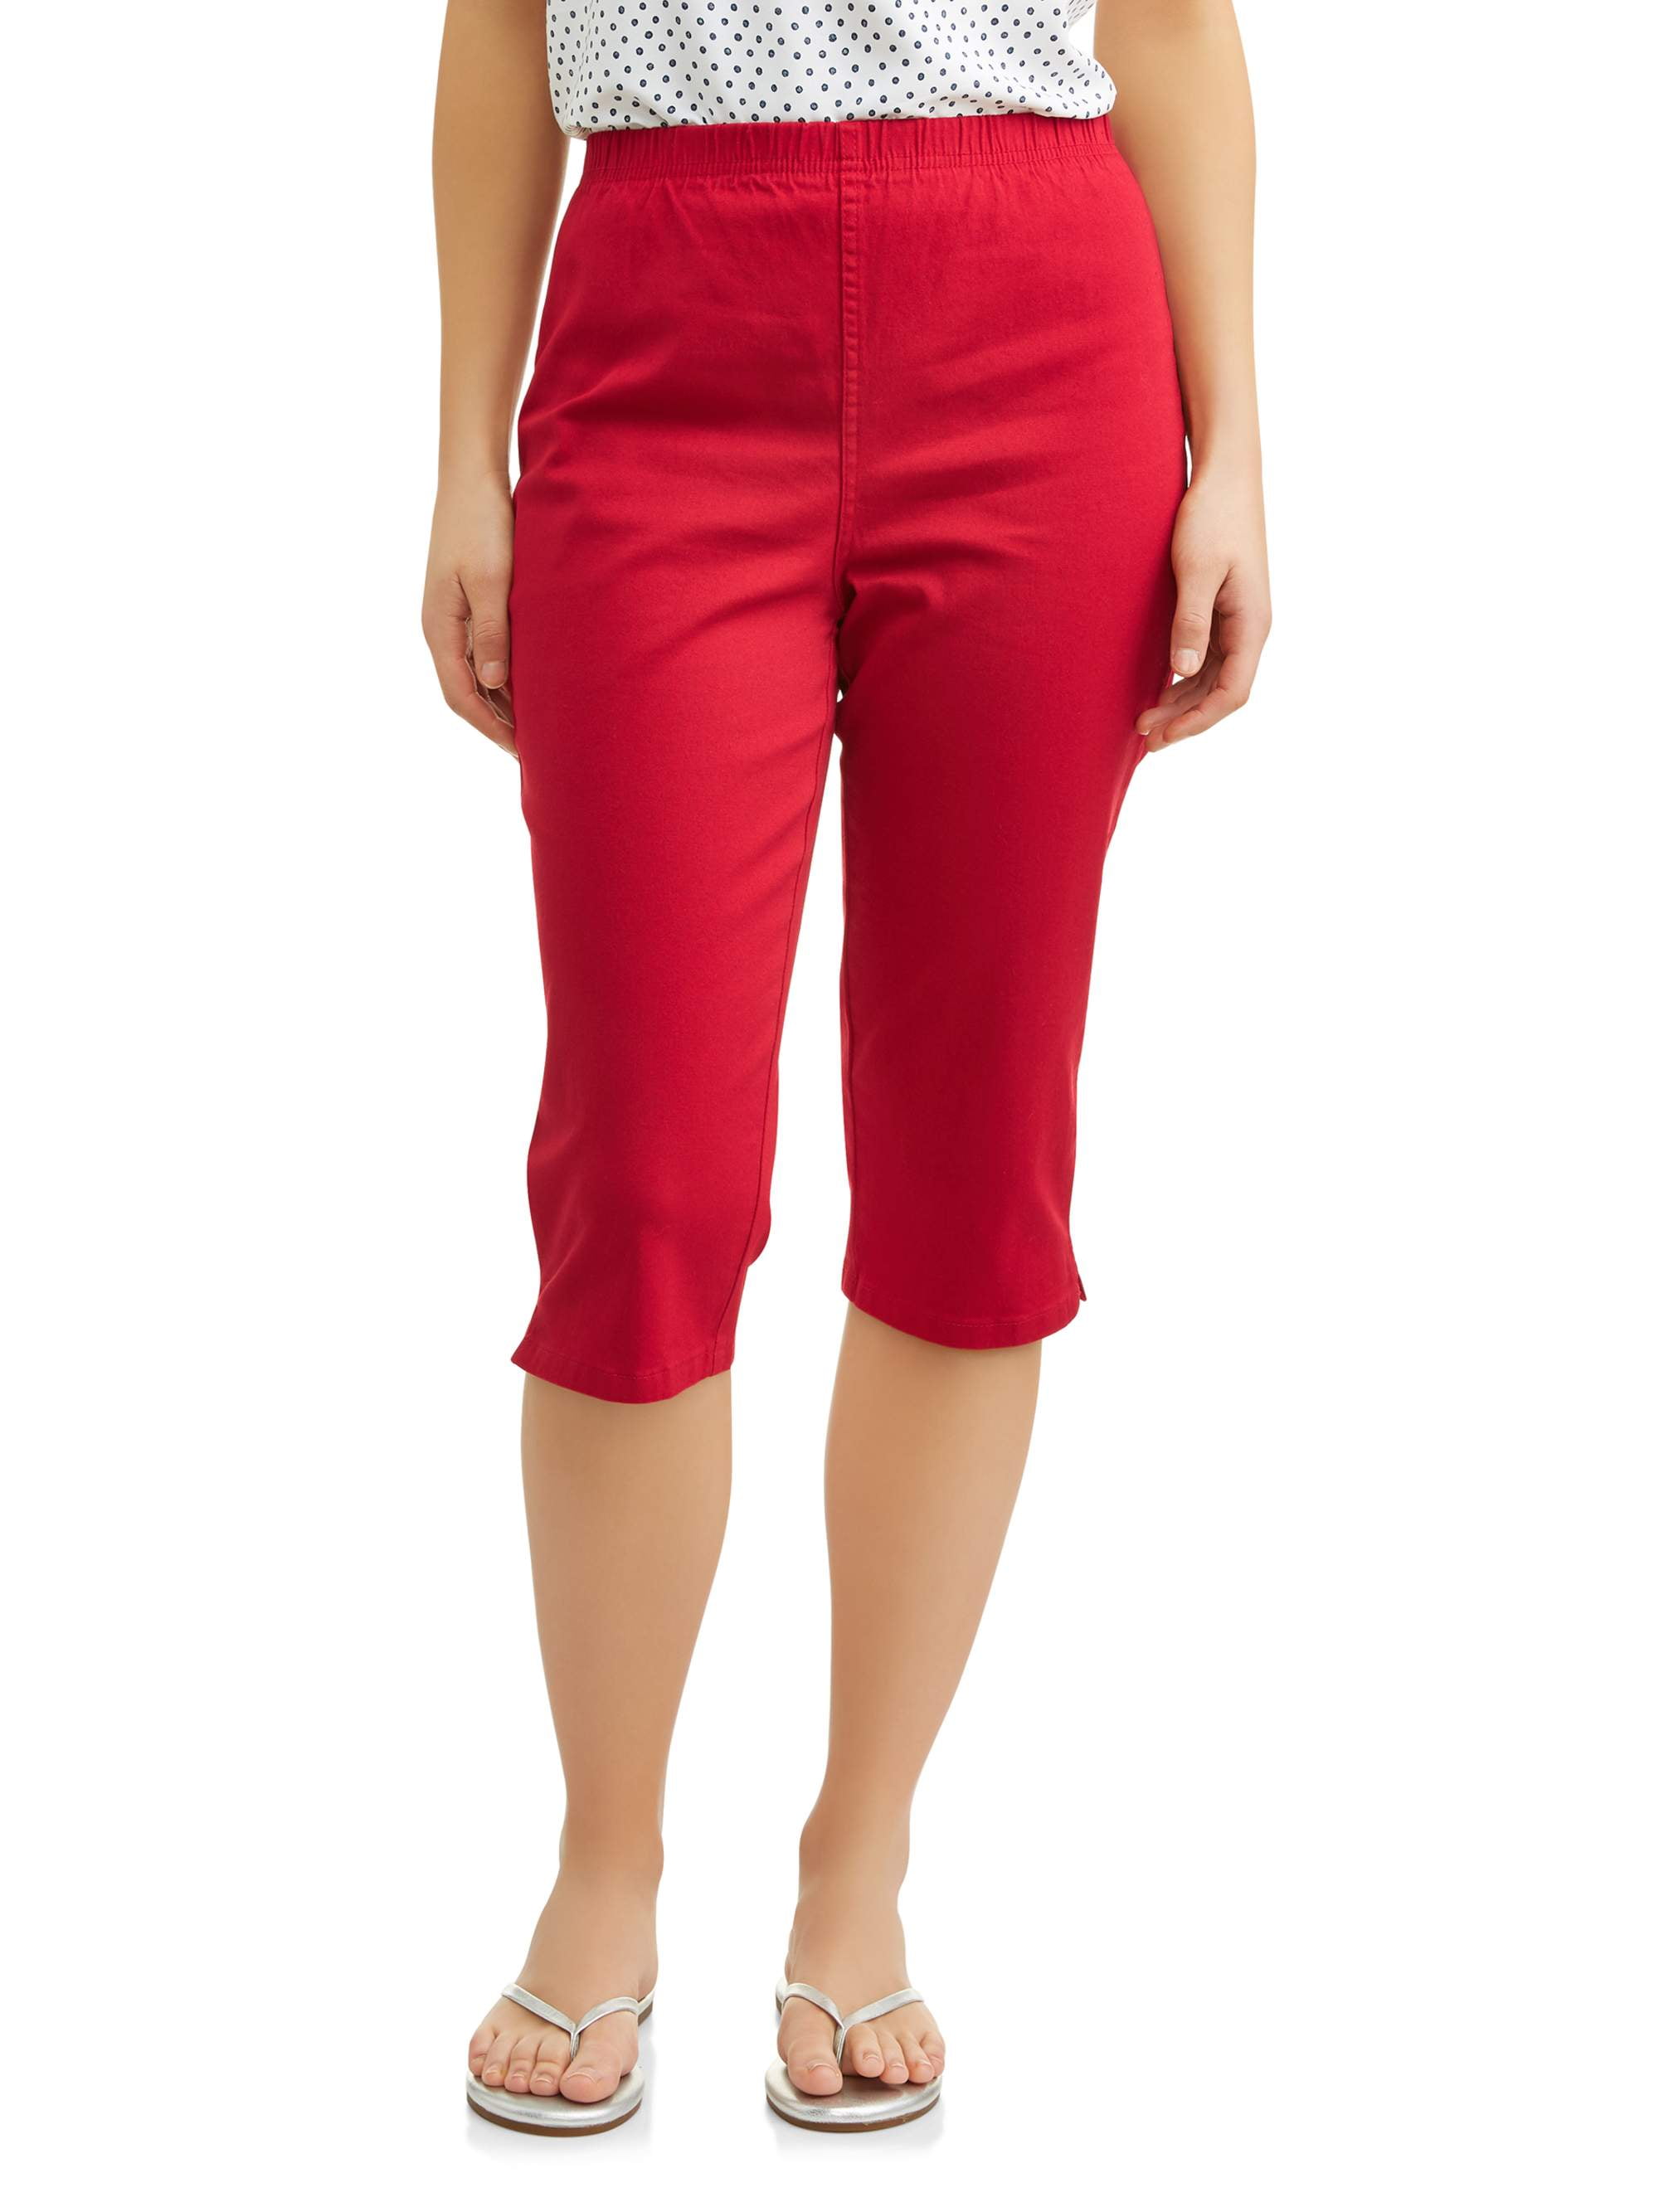 Ladies Crop Trousers Holiday Stretch 3/4 Summer Pockets Capri